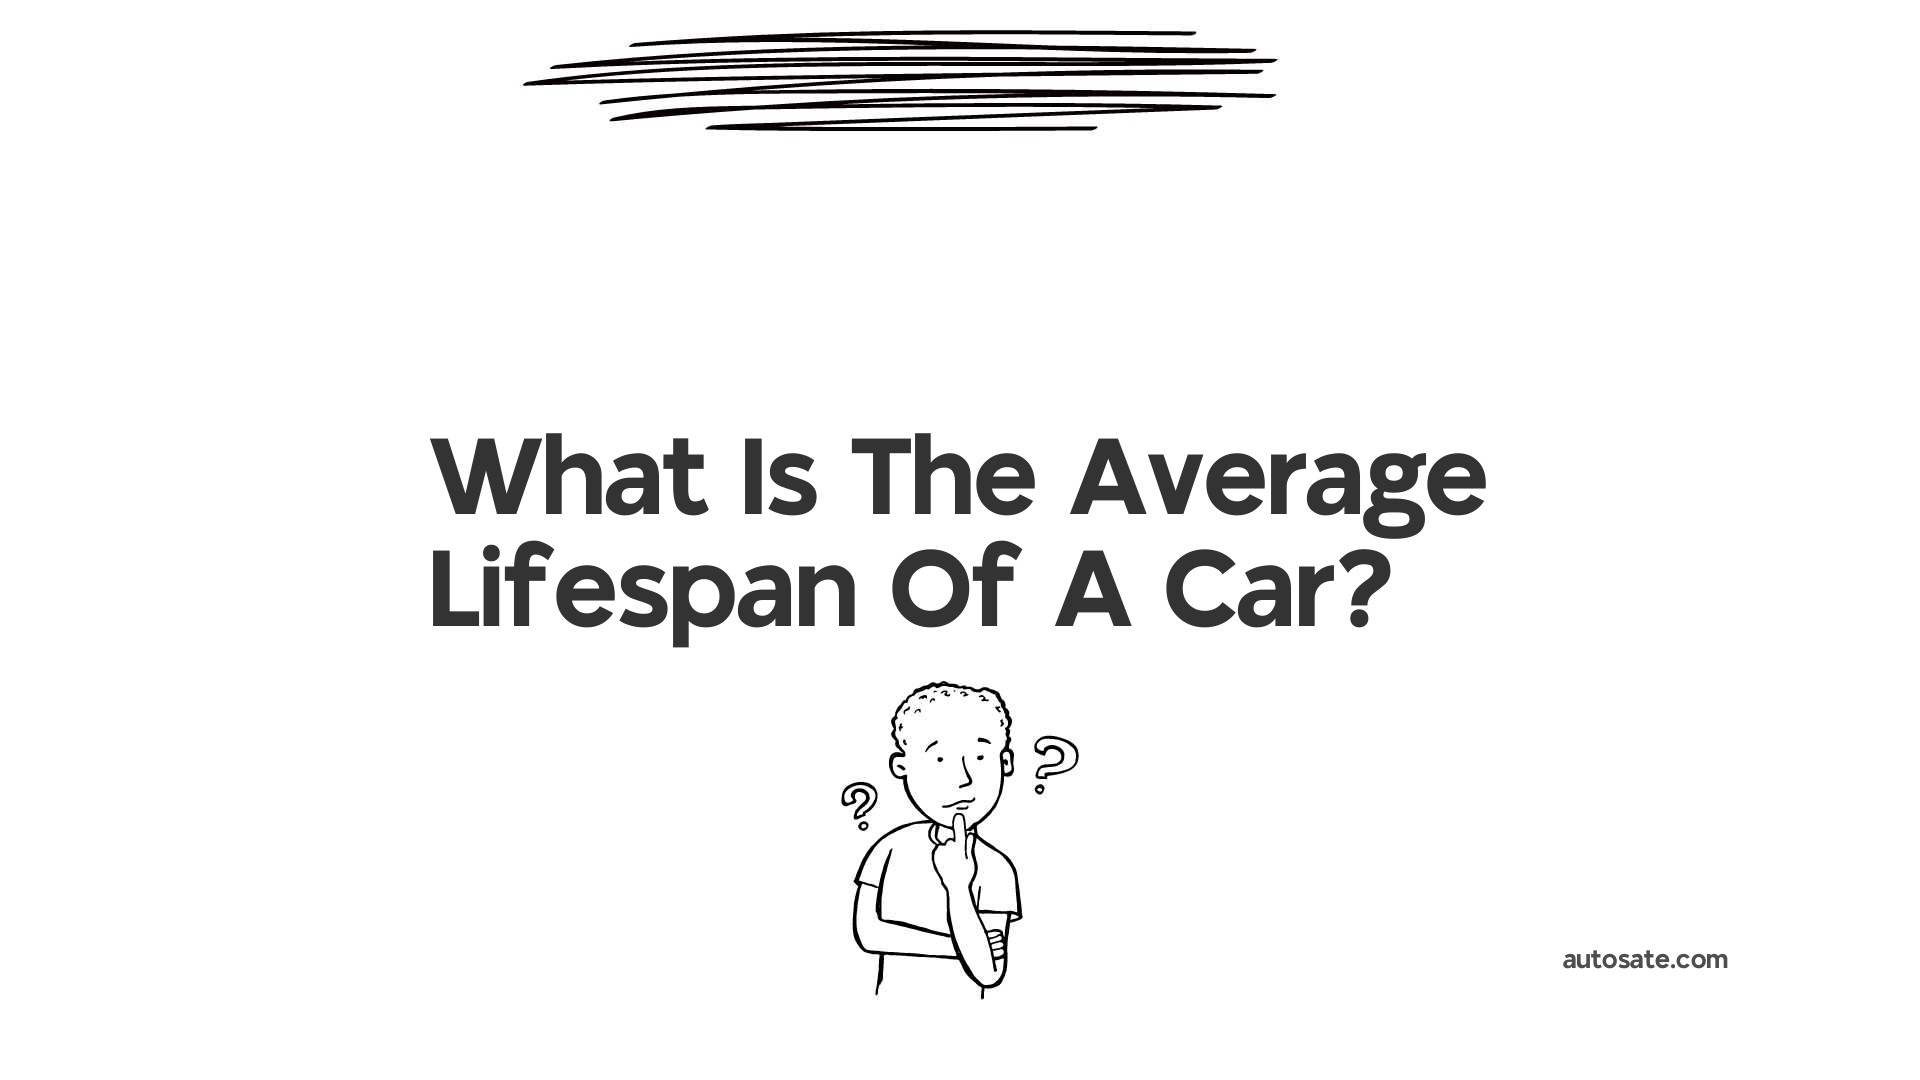 What Is The Average Lifespan Of A Car?